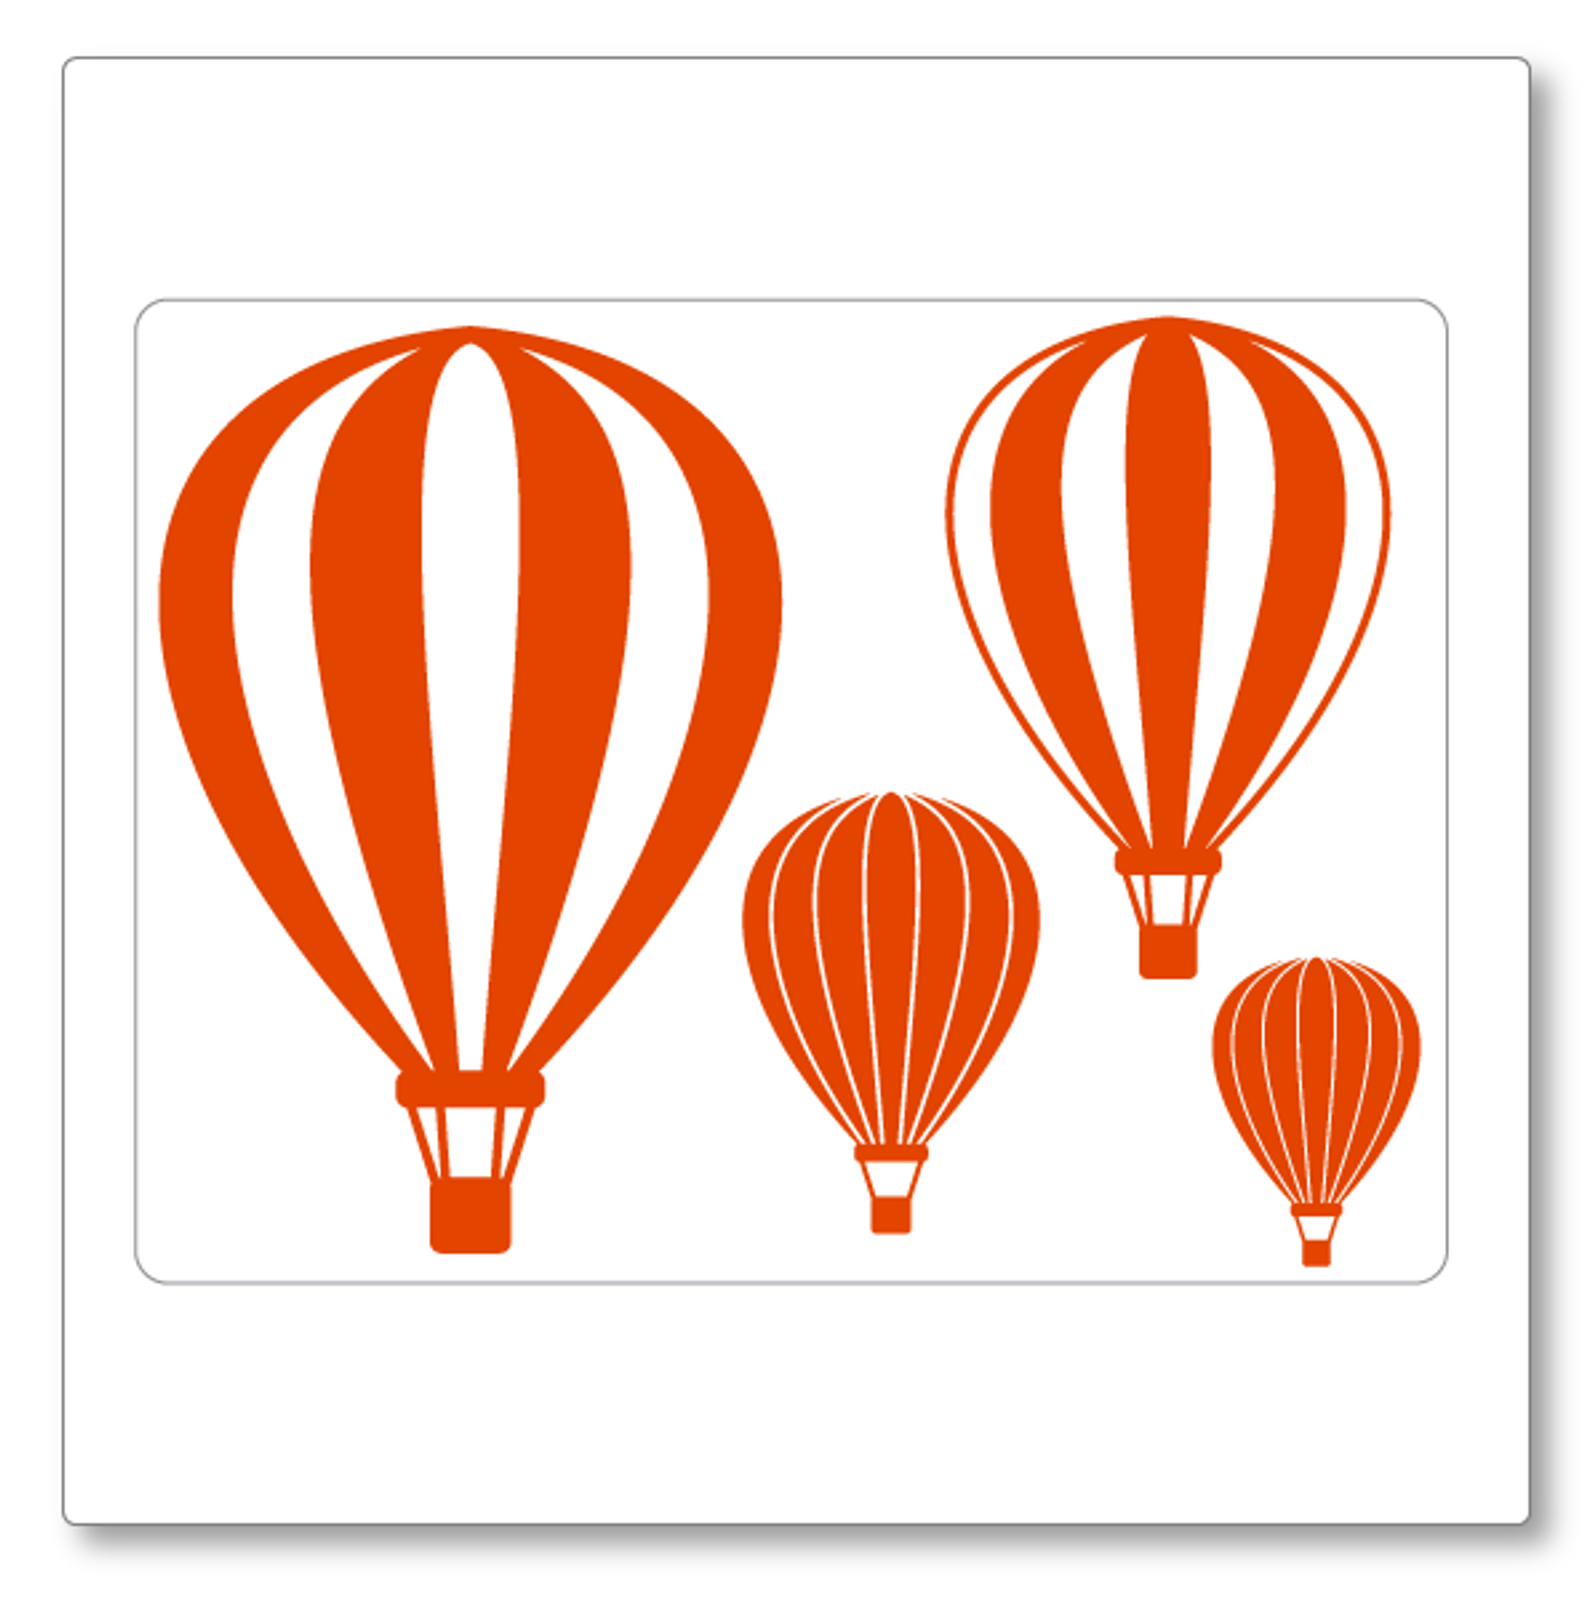 A set of four hot air balloons floating in the air. Two smaller and two larger. Single colour. Shown here in orange.